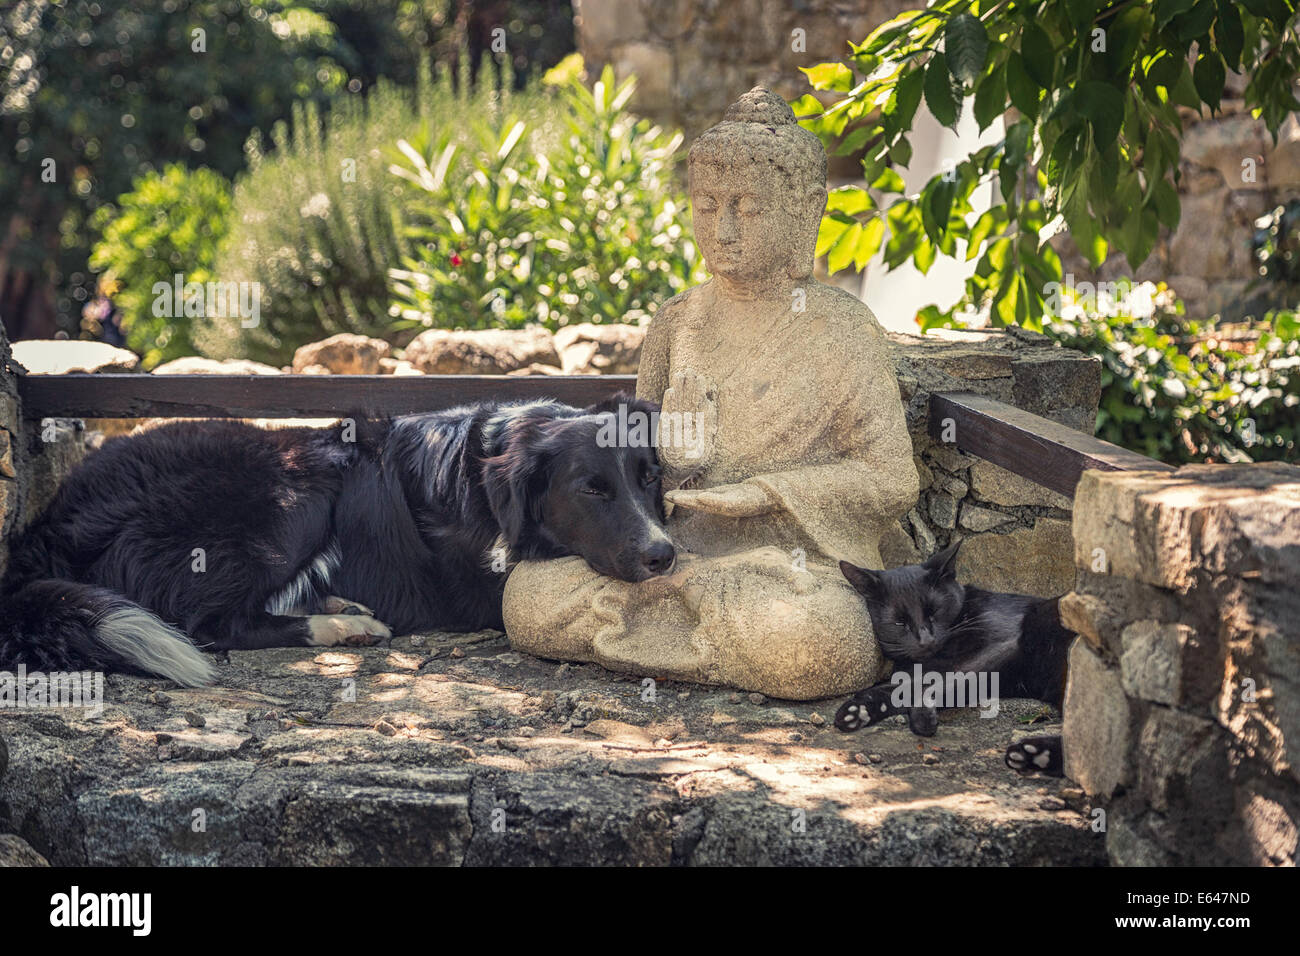 A border collie dog, a black cat rest on a Buddha statue in a shady spot on some stone steps Stock Photo